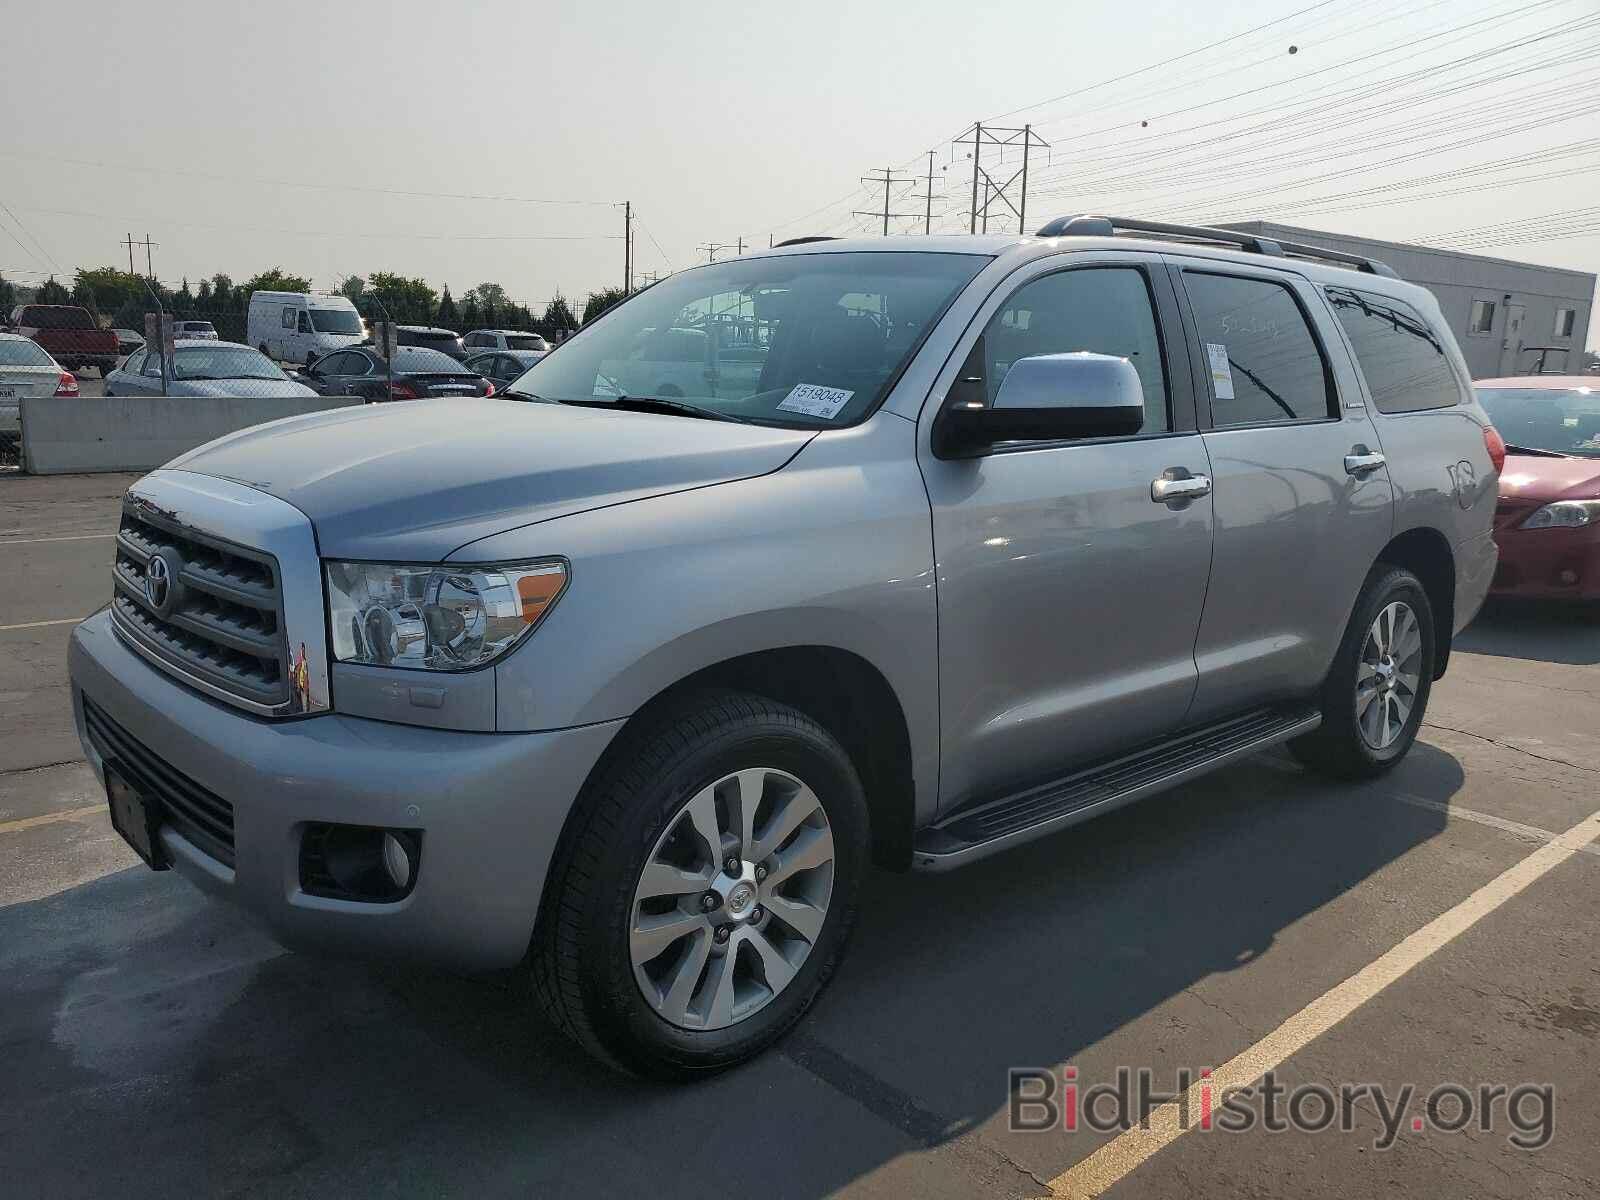 Photo 5TDJY5G19GS146641 - Toyota Sequoia 2016